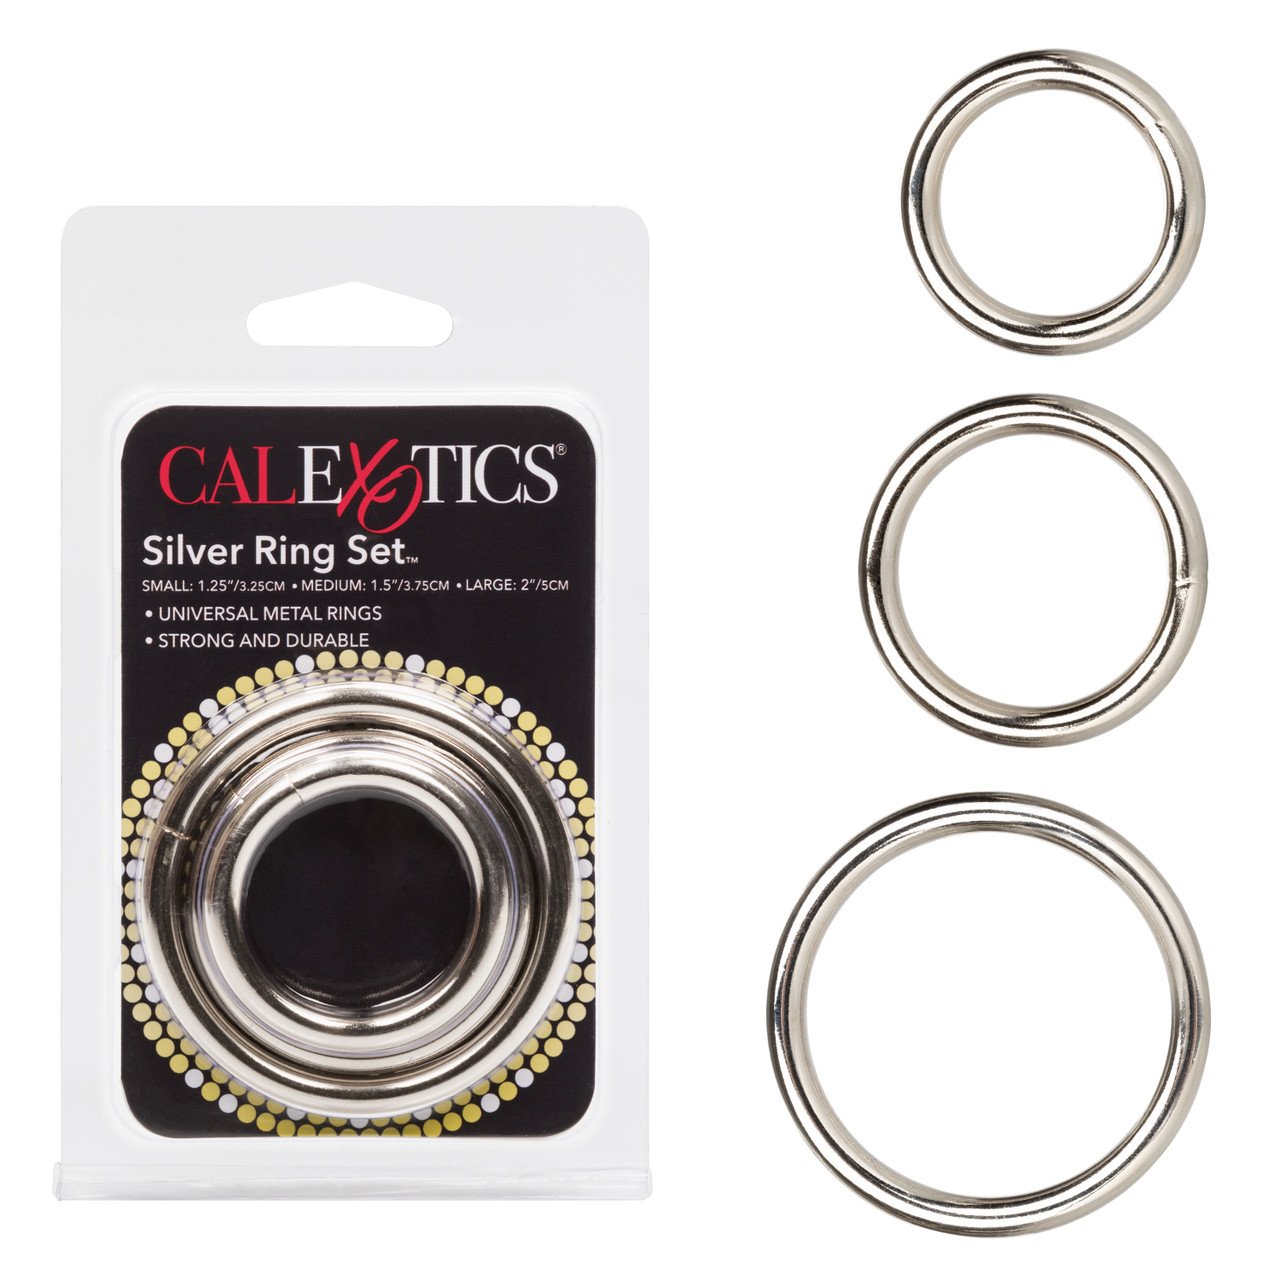 Wholesale flexible cock rings With A Variety Of Different Sizes